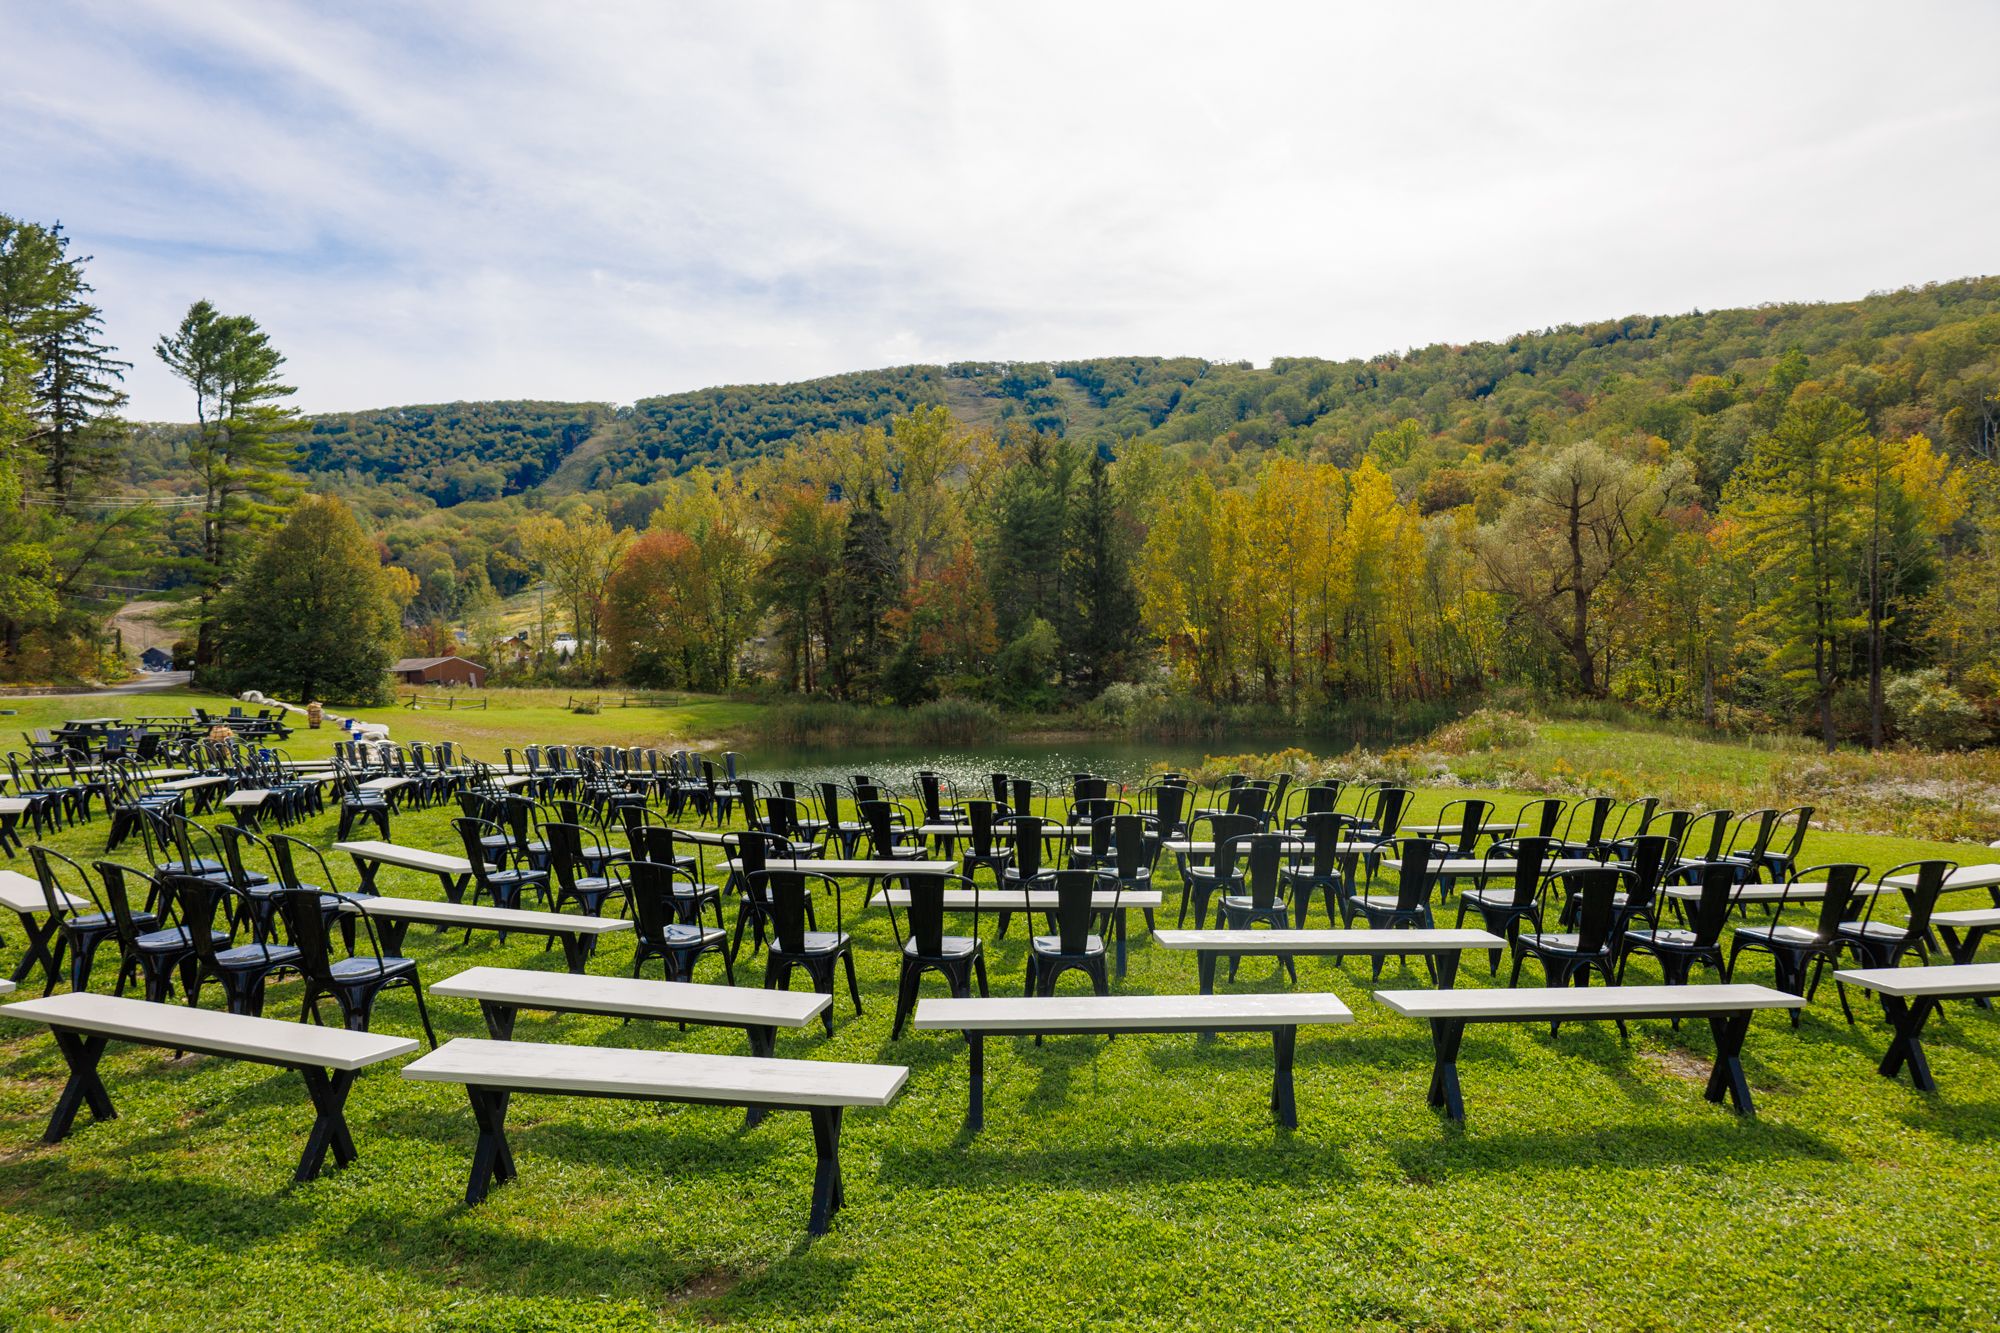 Wedding Seating all set up next to the pond at Catamount Resort